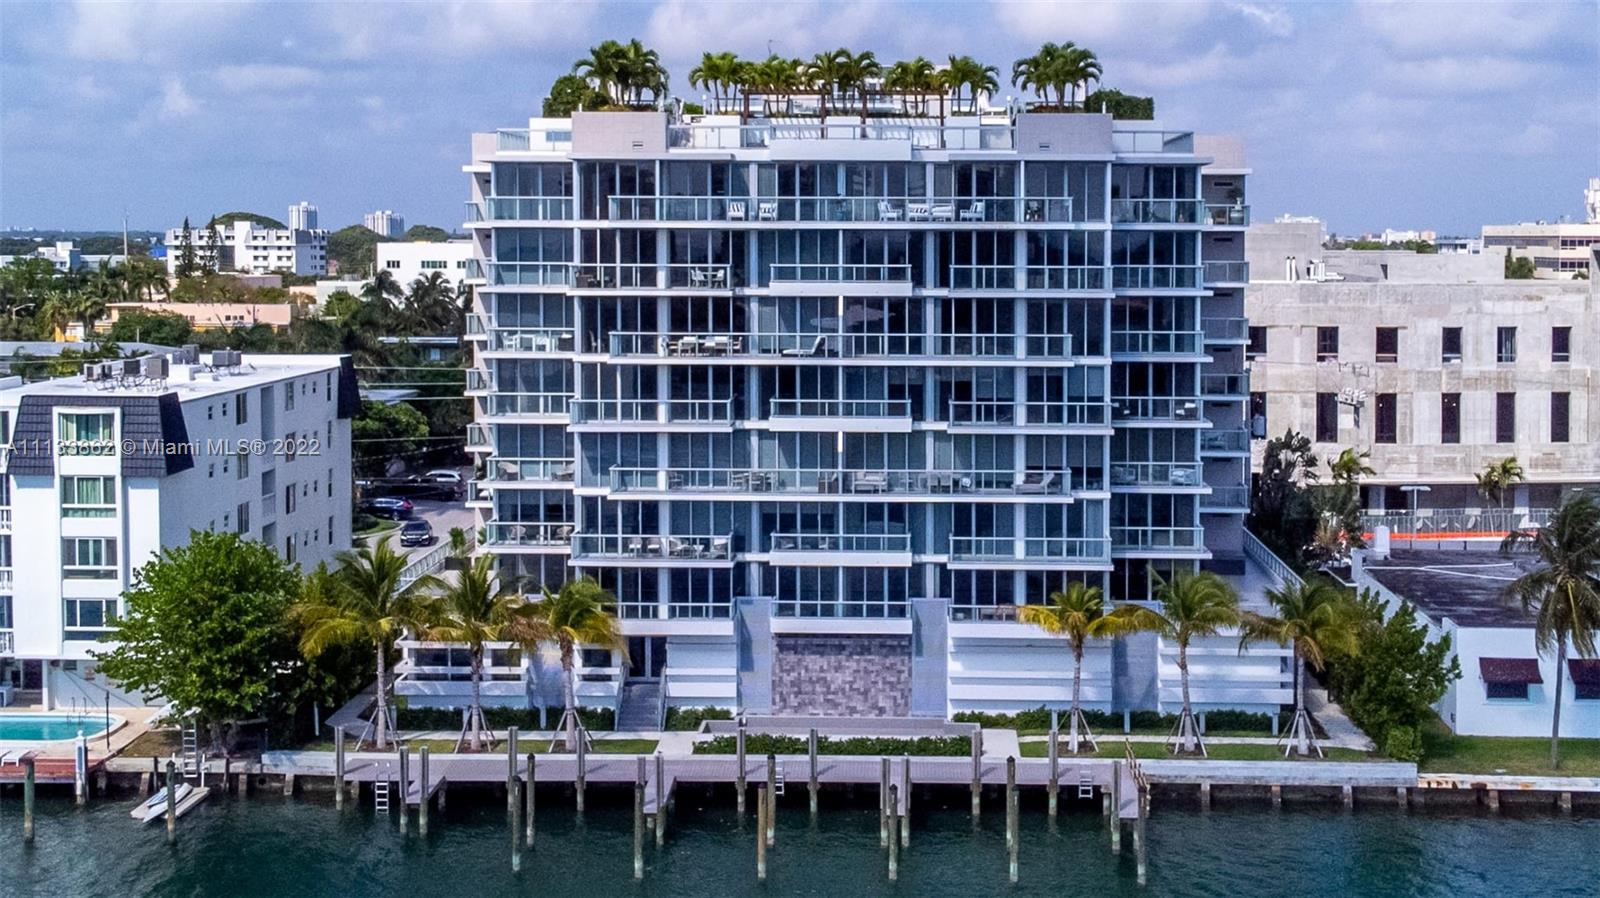 Great views of the intercoastal and Bay Harbor Islands. Top of the line brand-new home at Bijou. Penthouse PH01 in this luxury boutique 10-story building in waterfront location. Stainless Steel appliances, quartz kitchen countertops and island, stunning views from the Master Bedroom & living area. Parking is 2 spots, unassigned and valet parking. High Ceilings. For a limited time, association offering 6 month free of slip boat for owner/tenant.